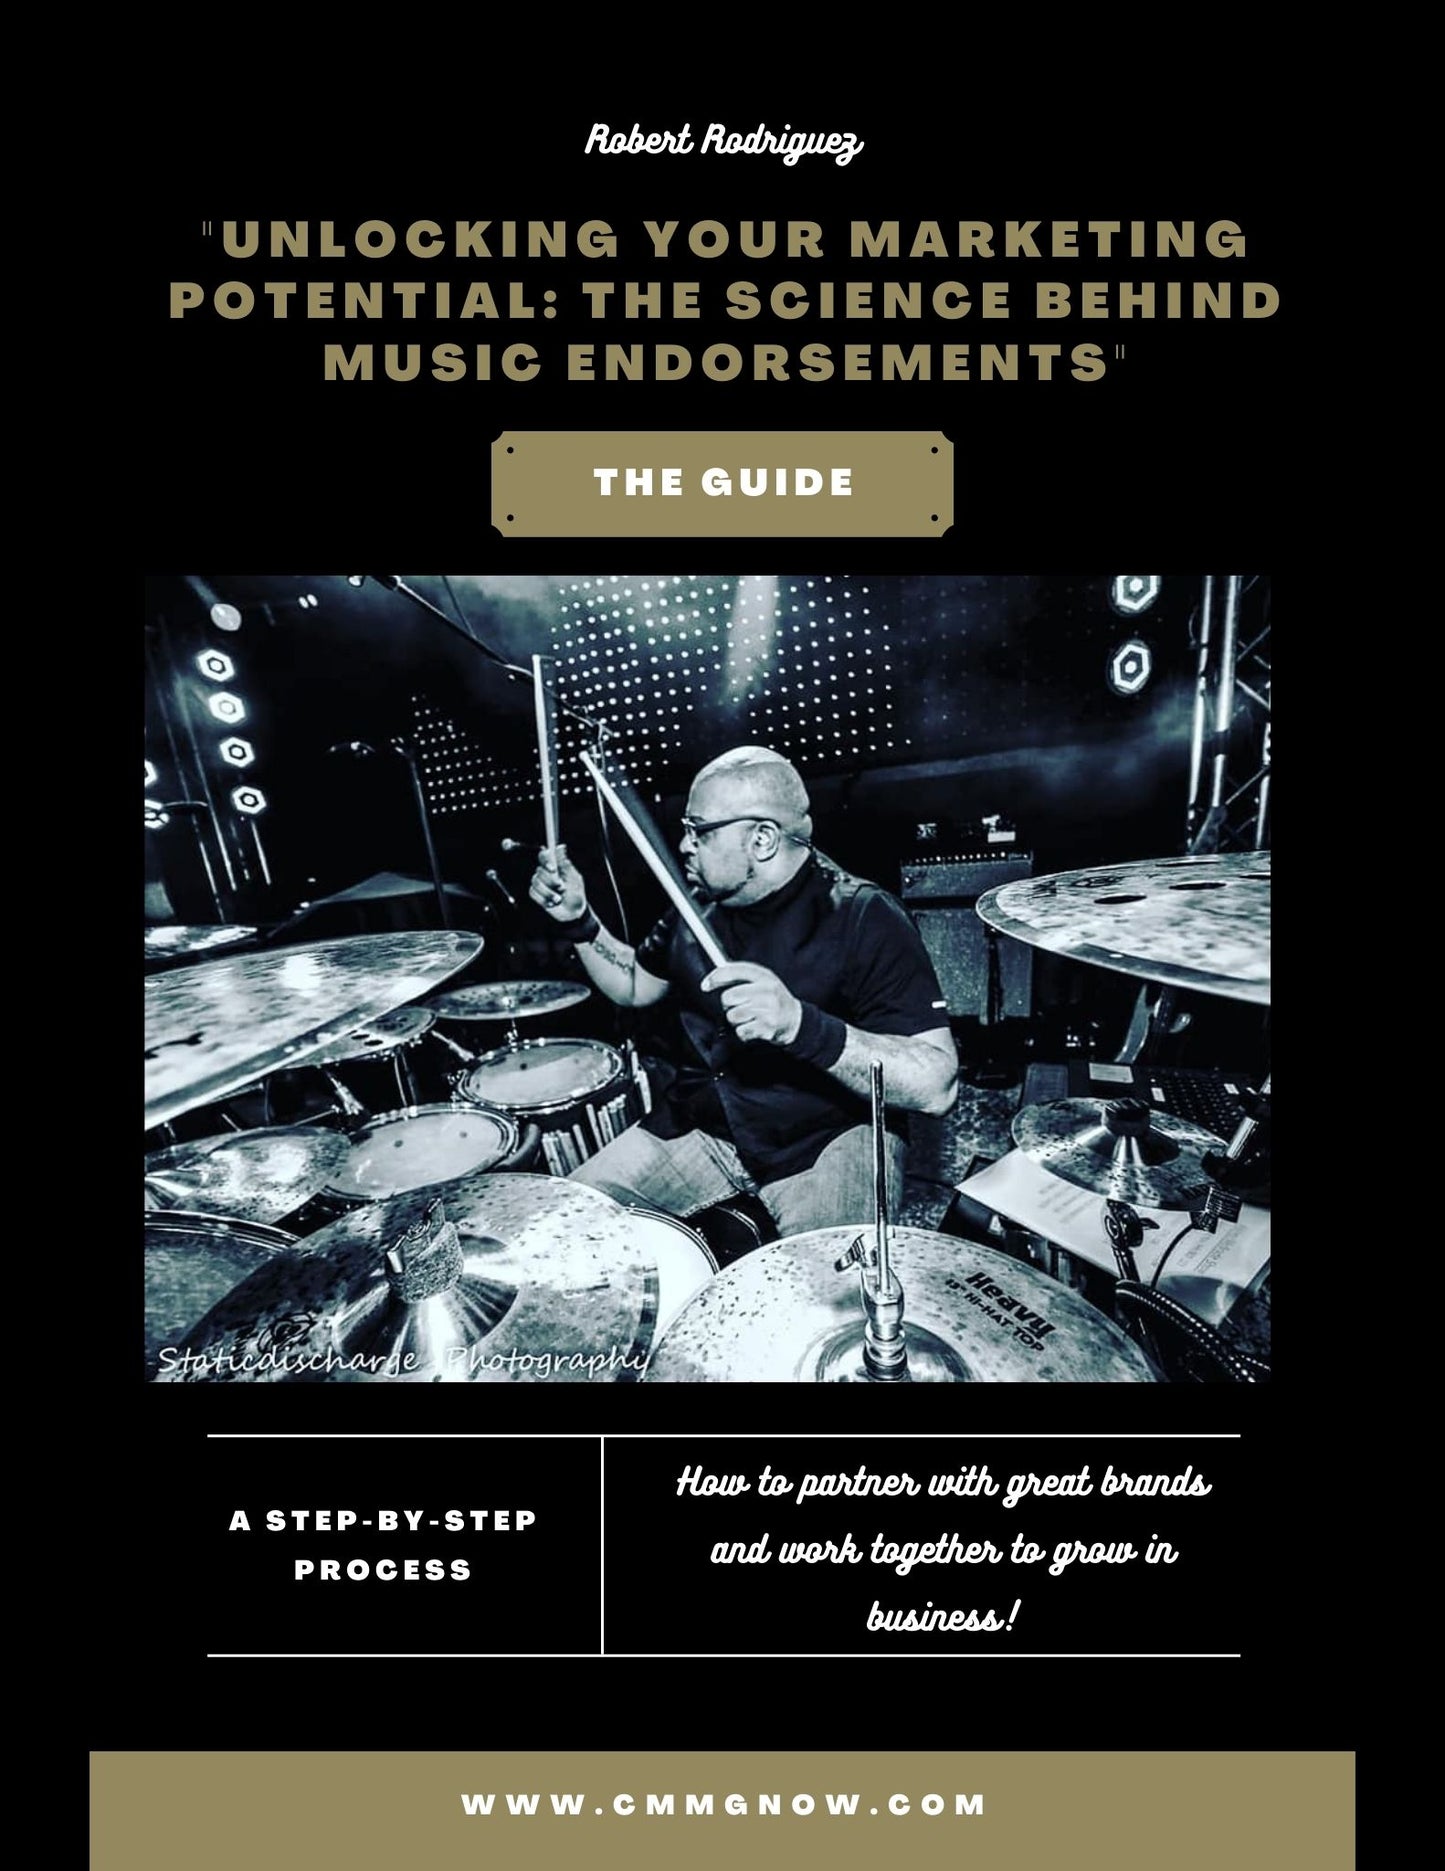 EBOOK: "UNLOCKING YOUR MARKETING POTENTIAL: THE SCIENCE BEHIND MUSIC ENDORSEMENTS"